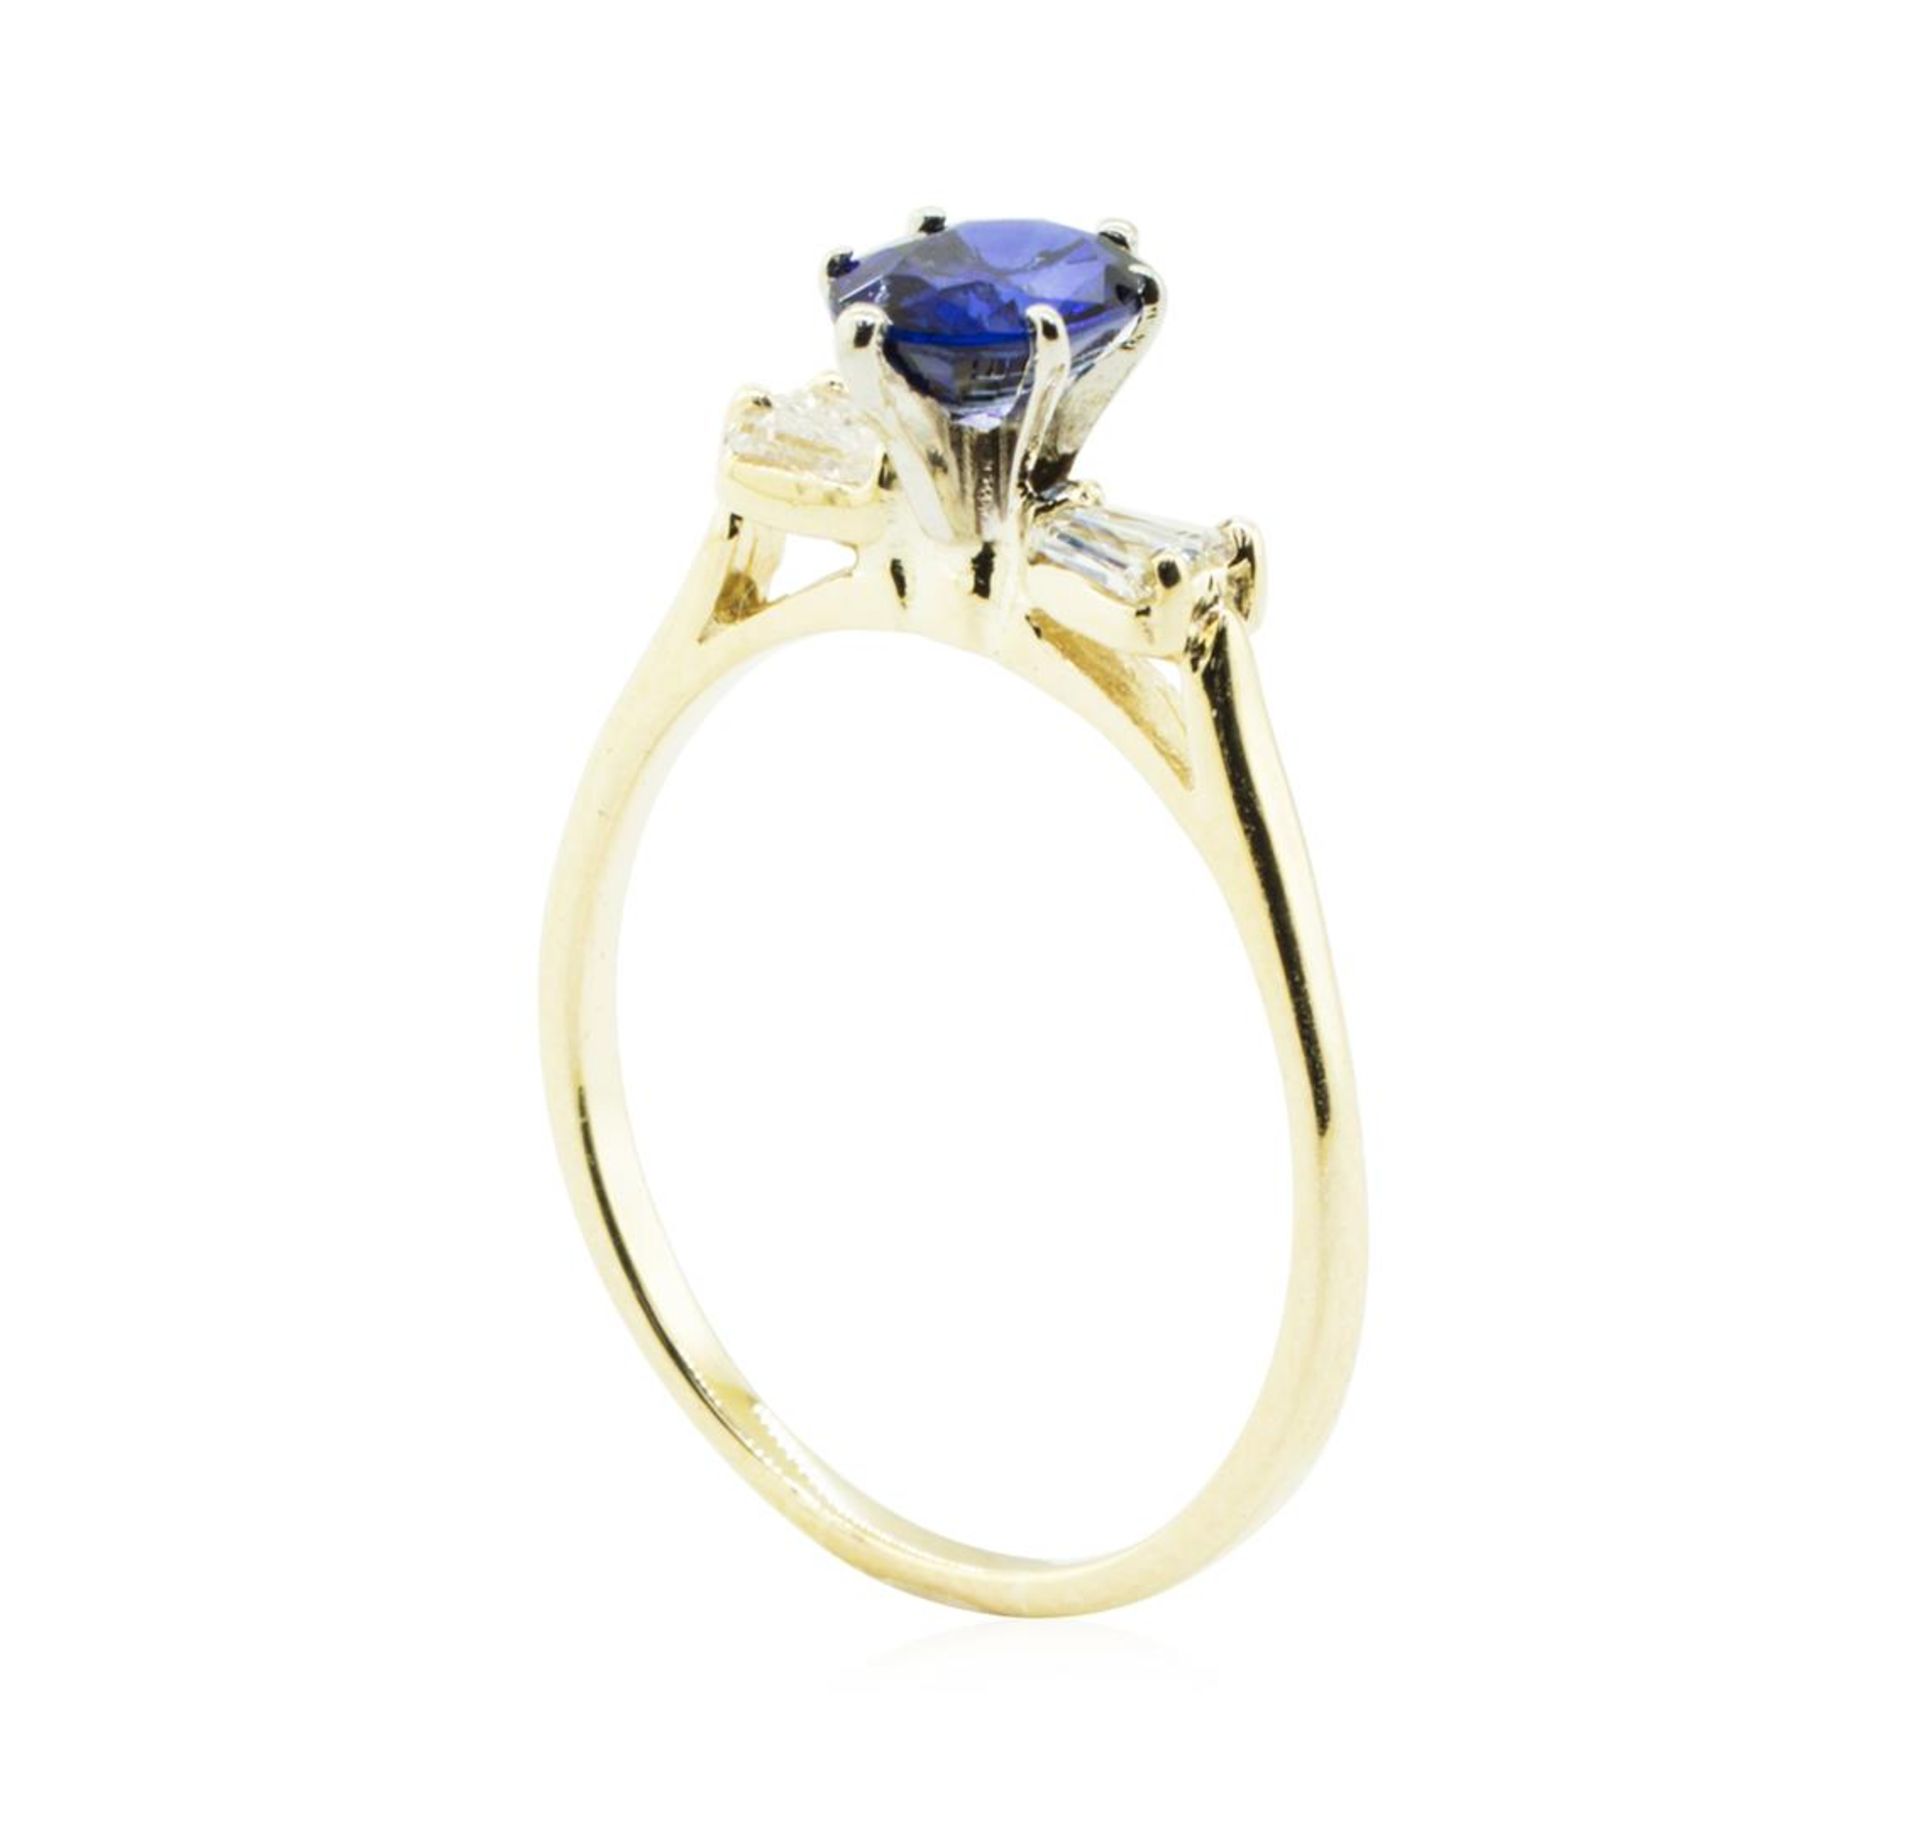 1.17ctw Blue Sapphire and Diamond Ring - 14KT Yellow Gold - Image 4 of 4